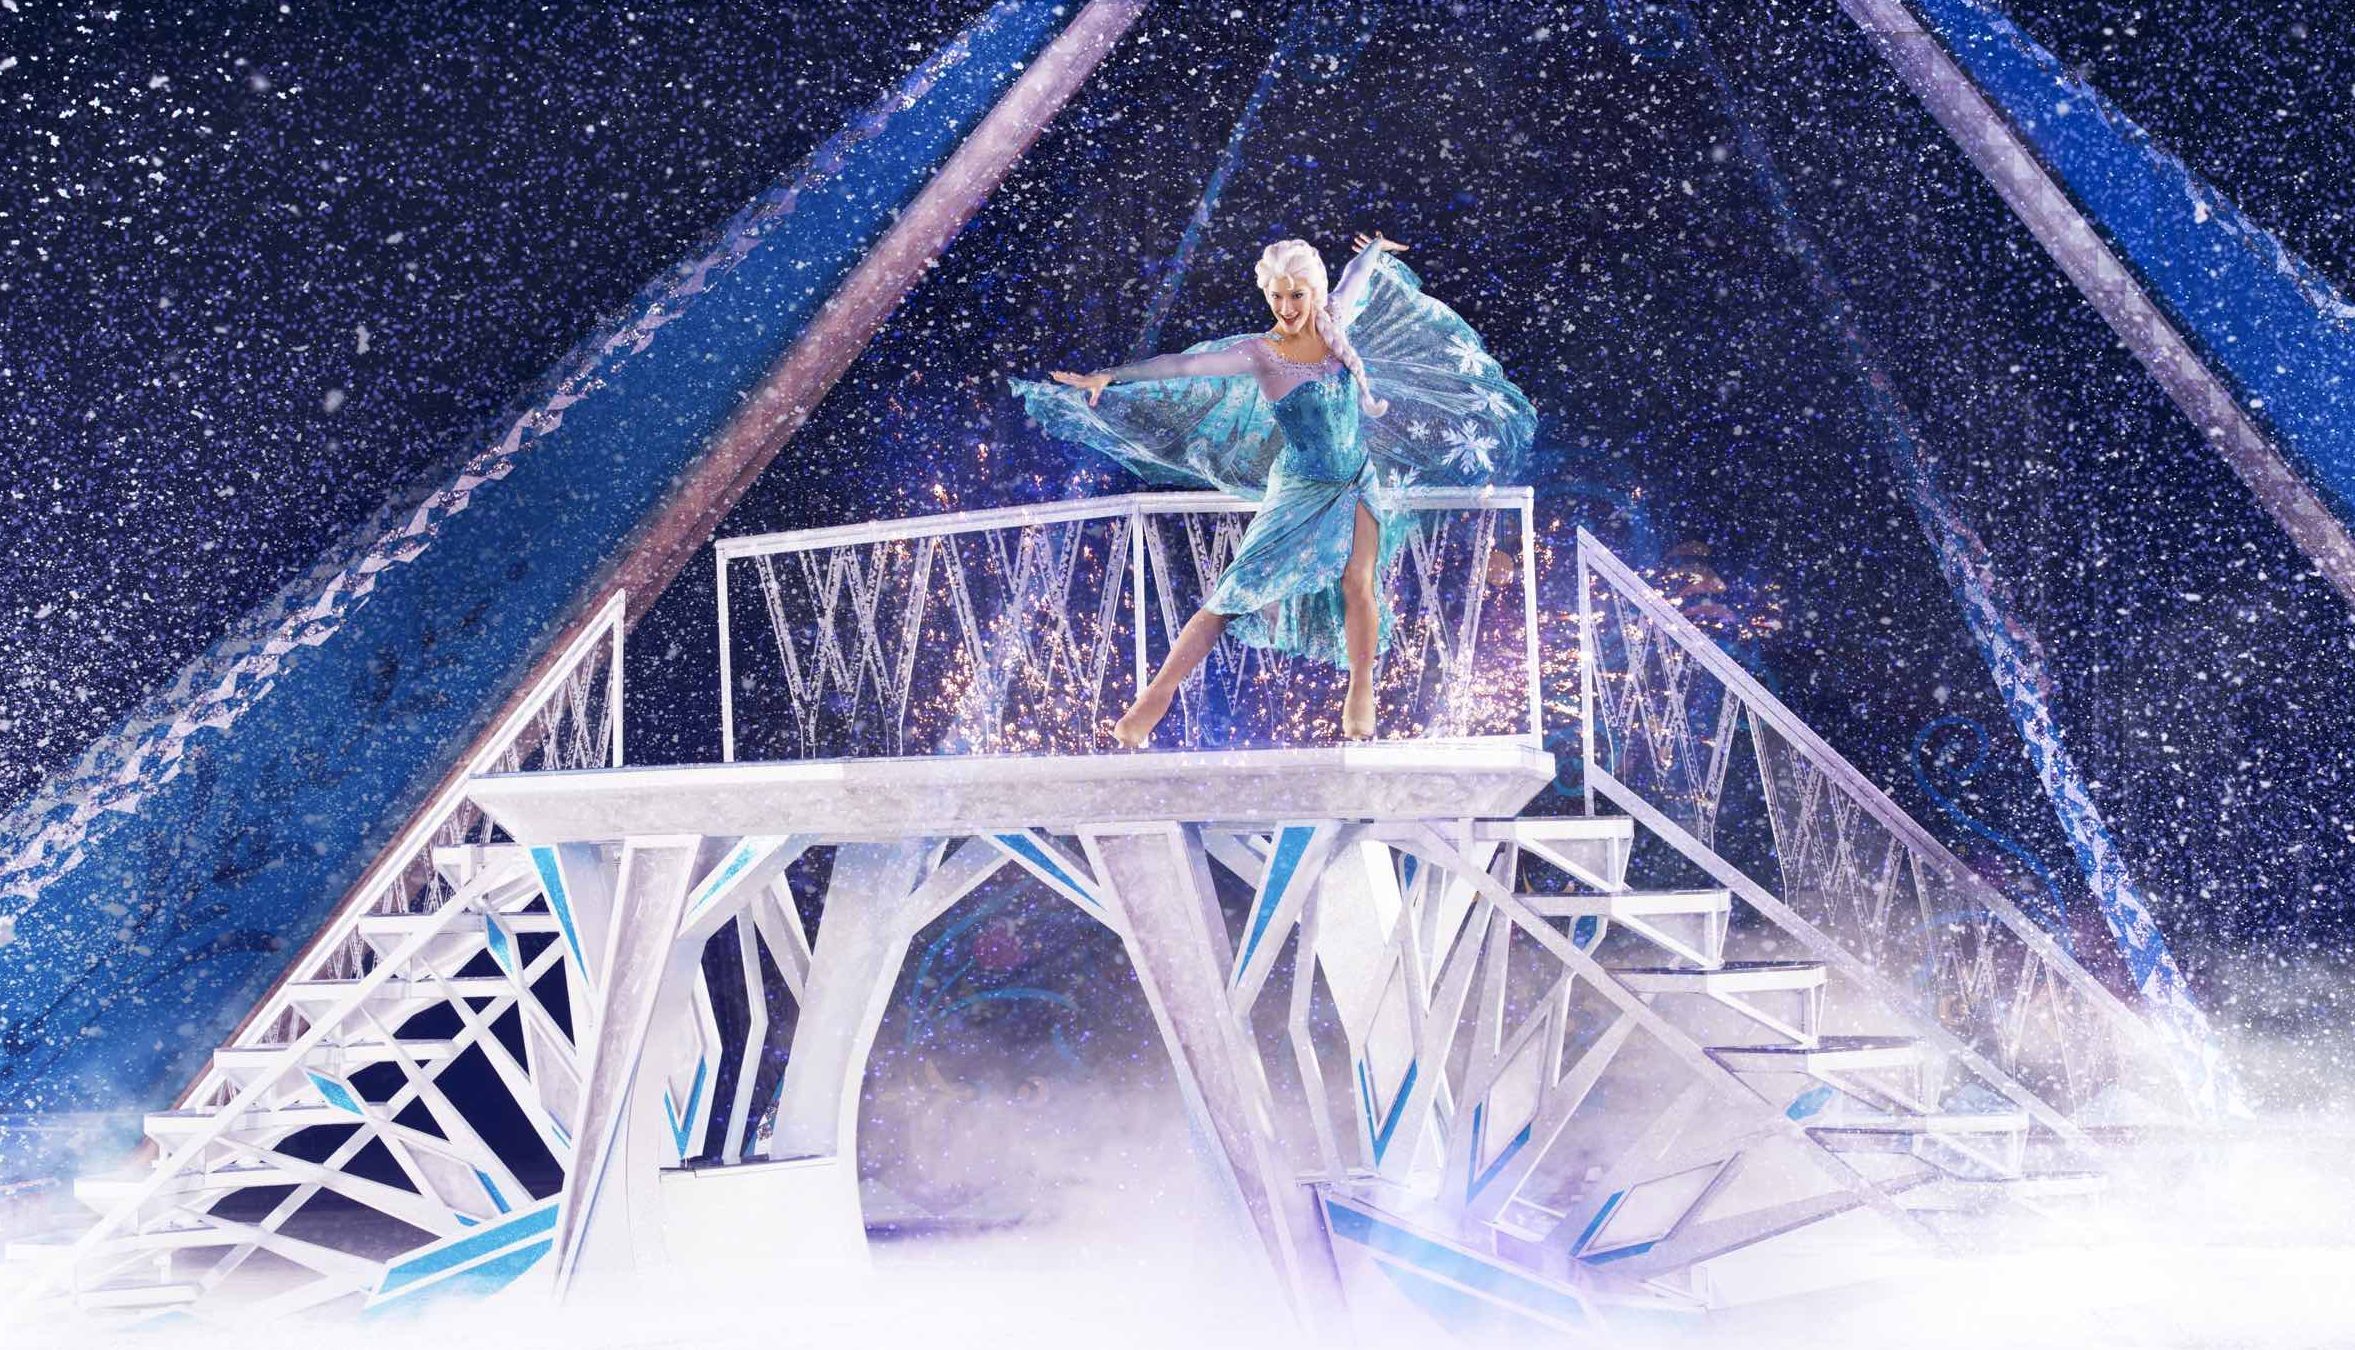 Elsa is one of the characters coming to the SSE Hydro ice show